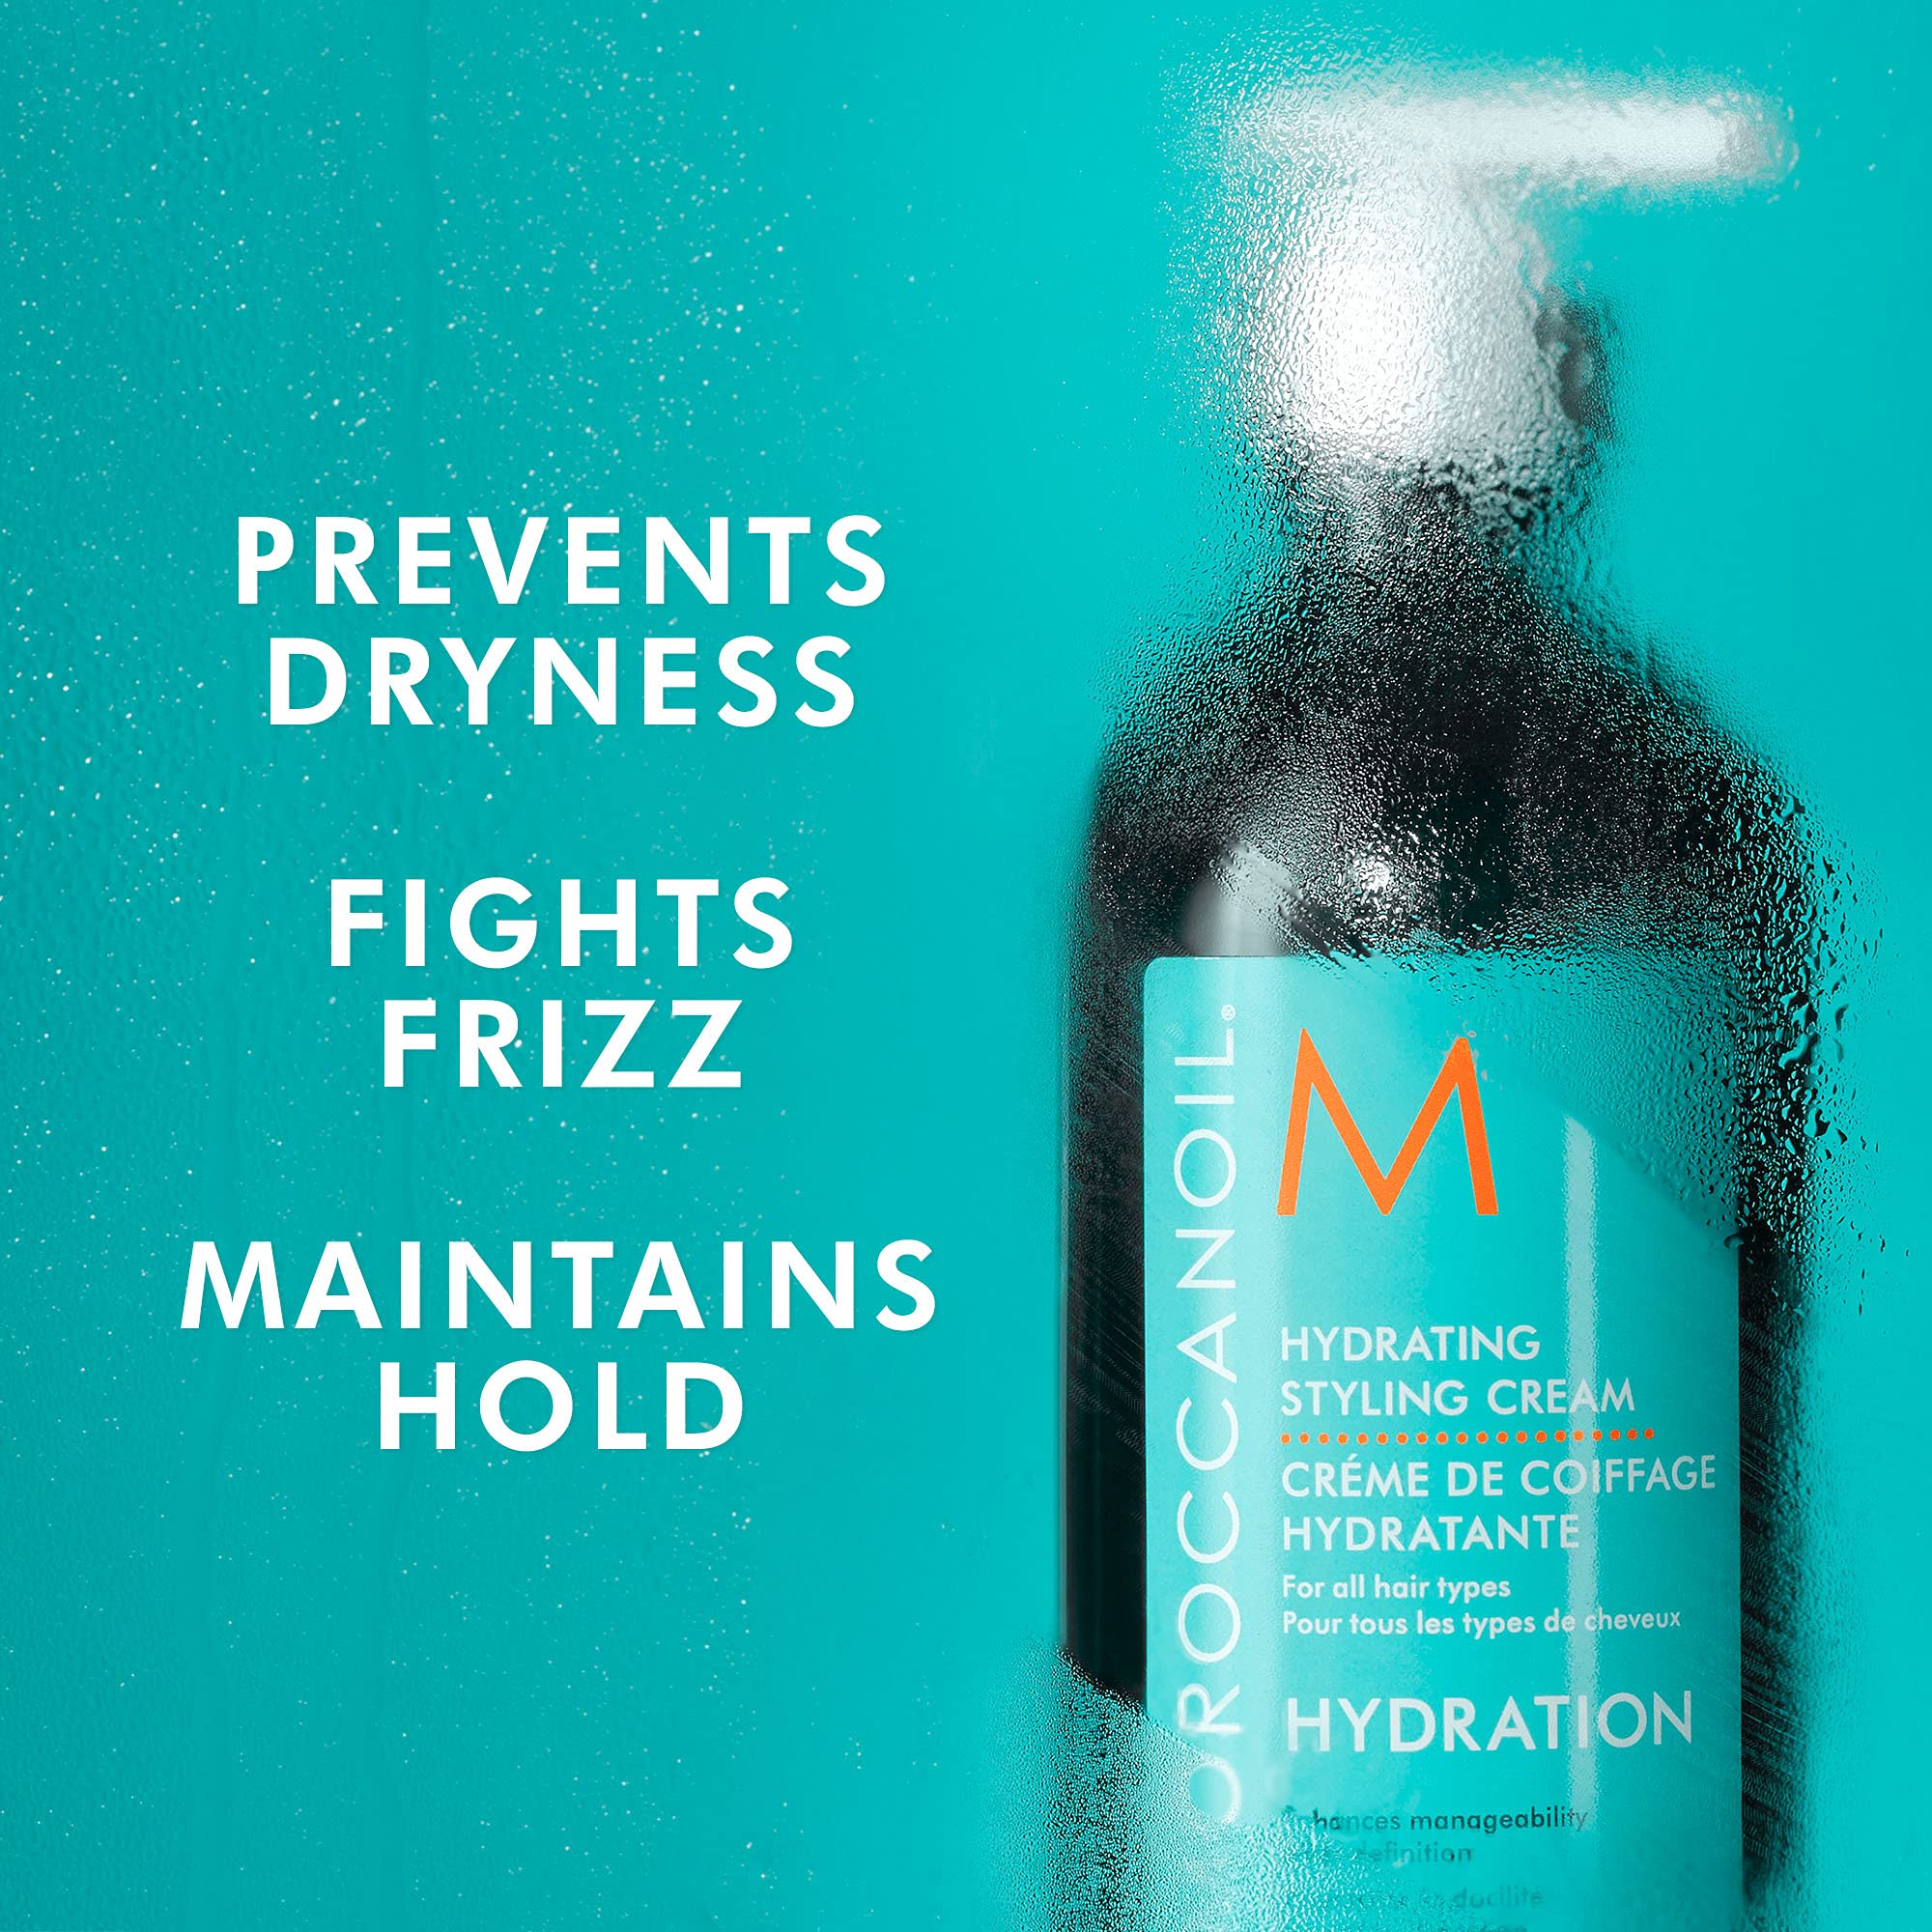 MOROCCANOIL Window to Shine Styling and Haircare Set